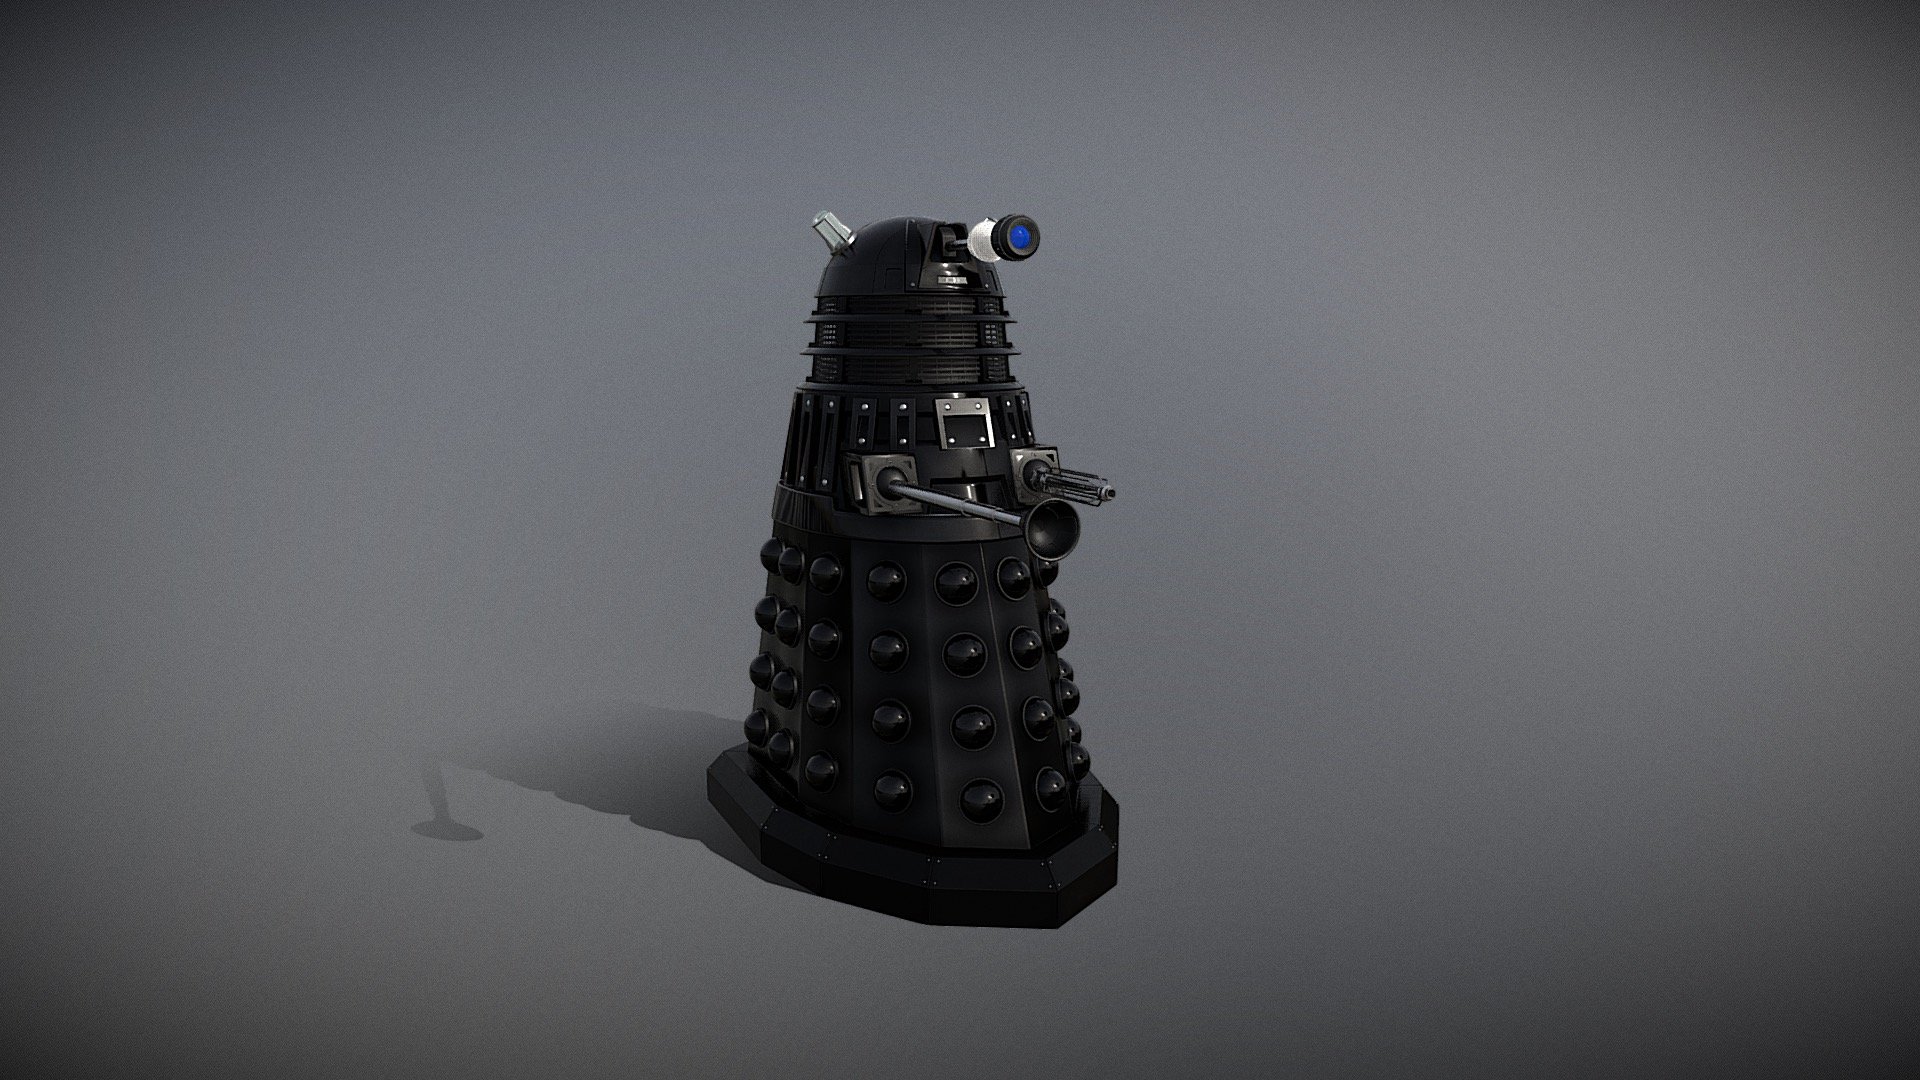 This model is NOT presented as &lsquo;Game Ready' 

New Series Dalek Sec

Rendered Pic

 - NSD Dalek Sec - Download Free 3D model by timblewee 3d model